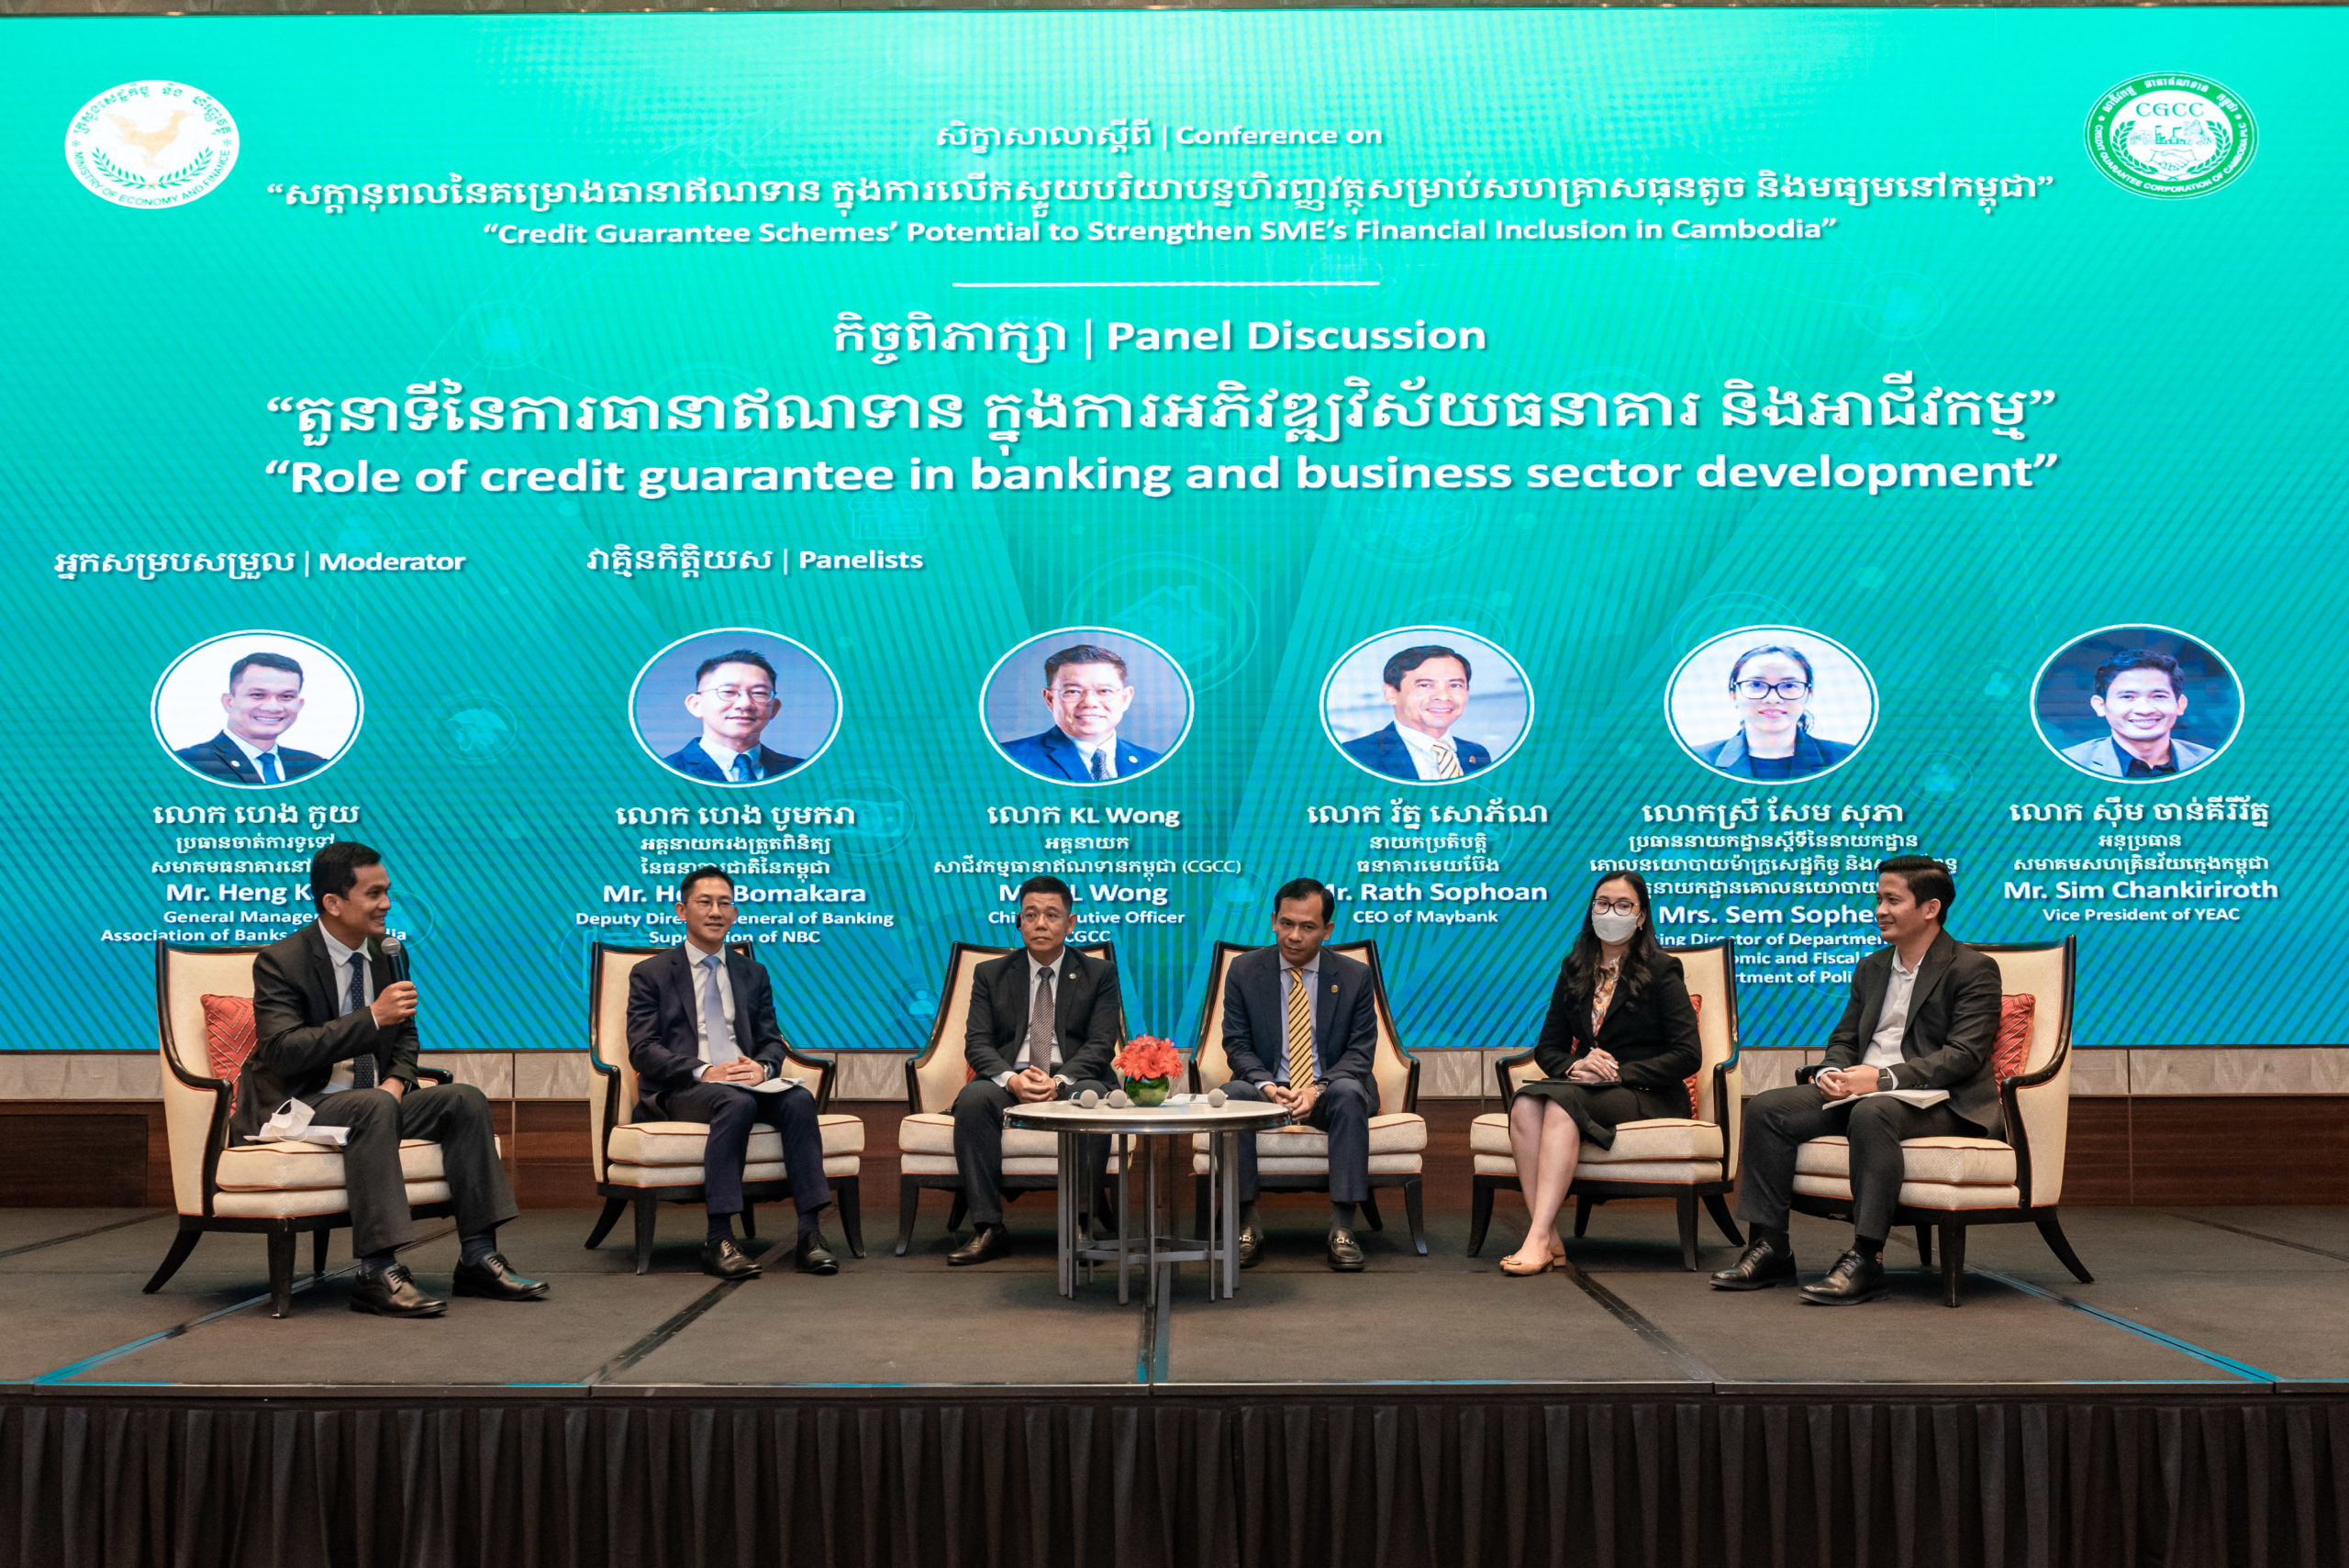 Press Release Conference on “Credit Guarantee Schemes’ Potential to Strengthen SME’s Financial Inclusion in Cambodia”